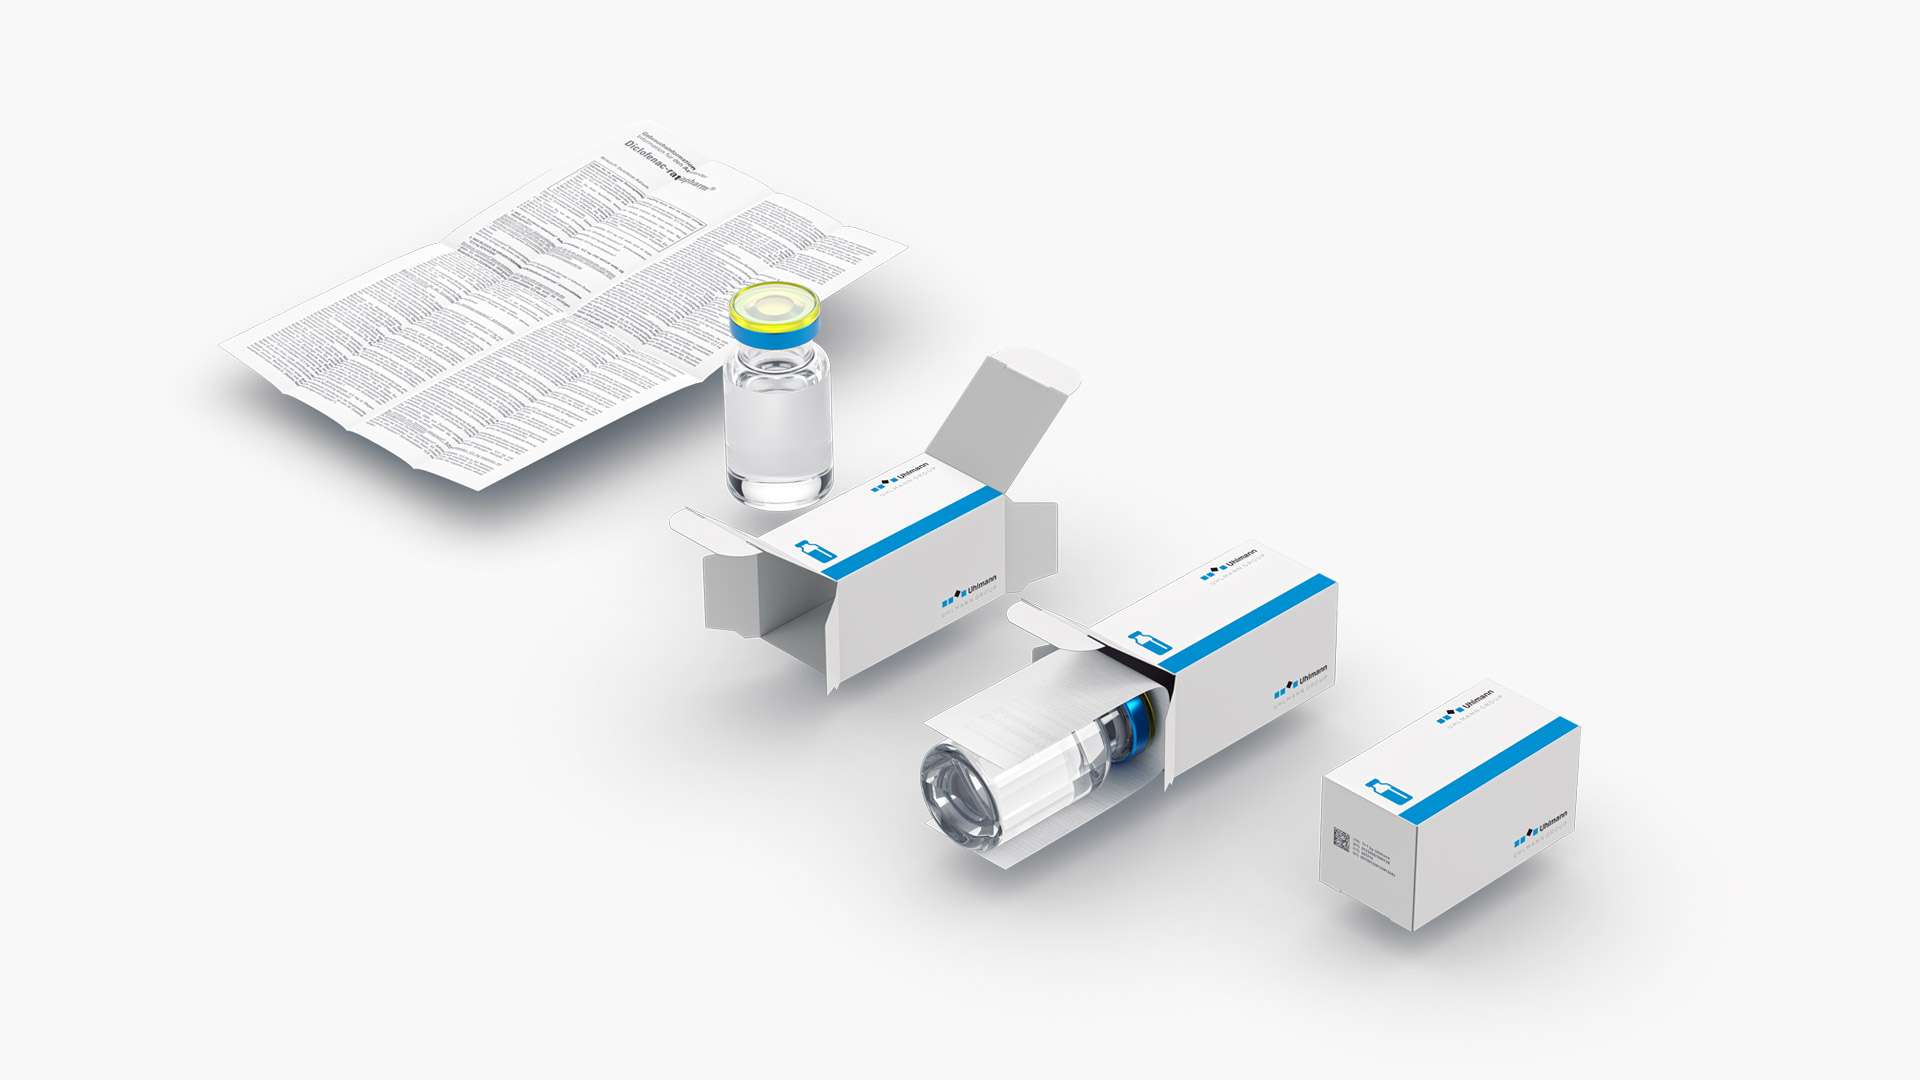 Ein Vial “Direct in Carton” inklusive Medical Device Tracking.